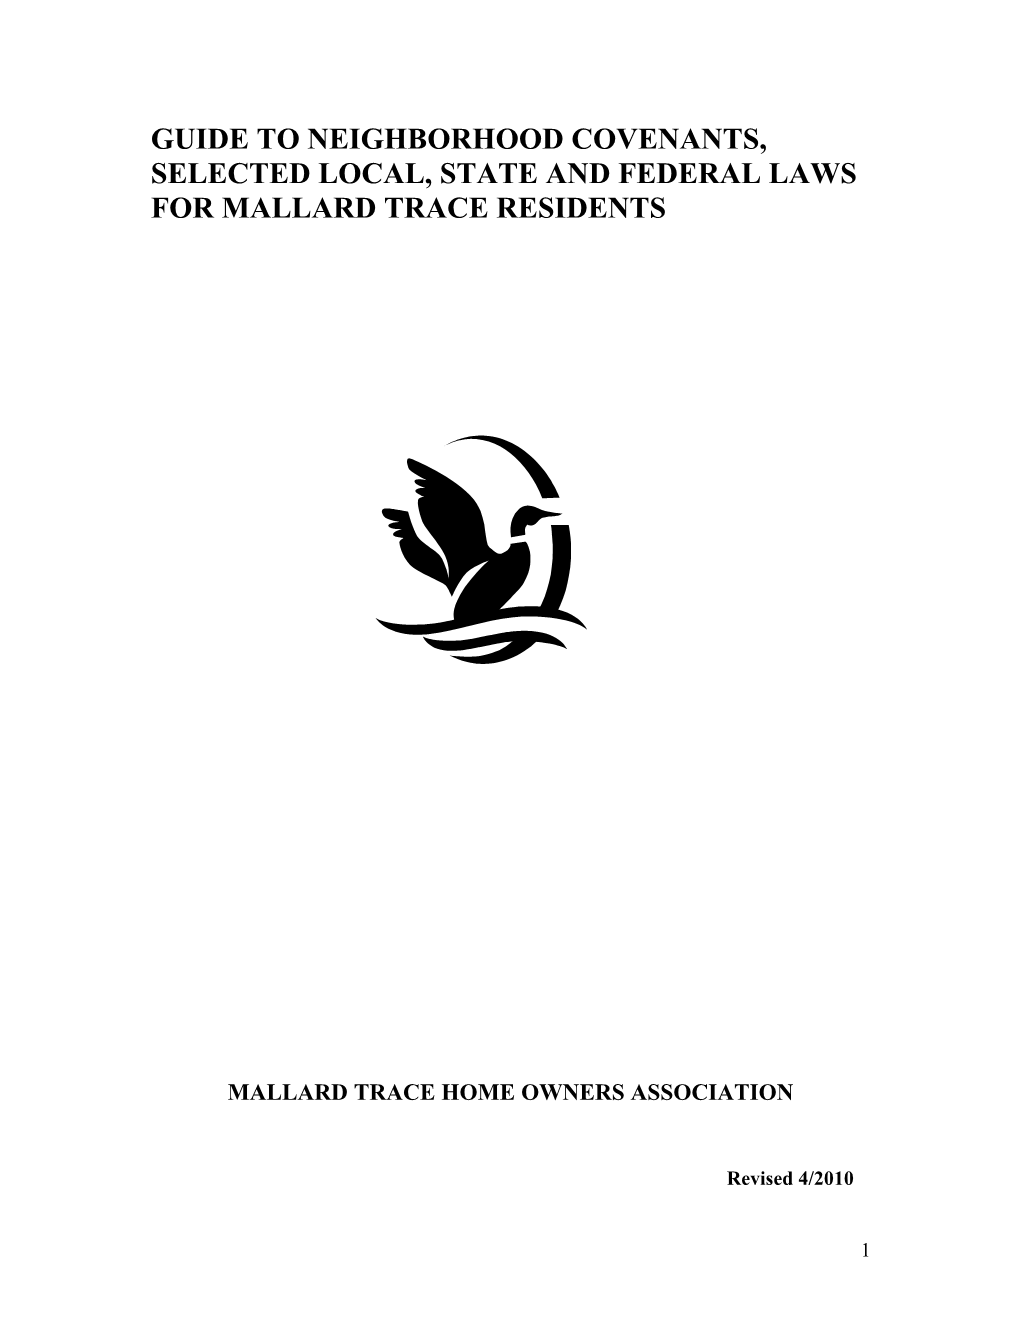 Guide to Mallard Trace Covenants, Conditions and Restrictions